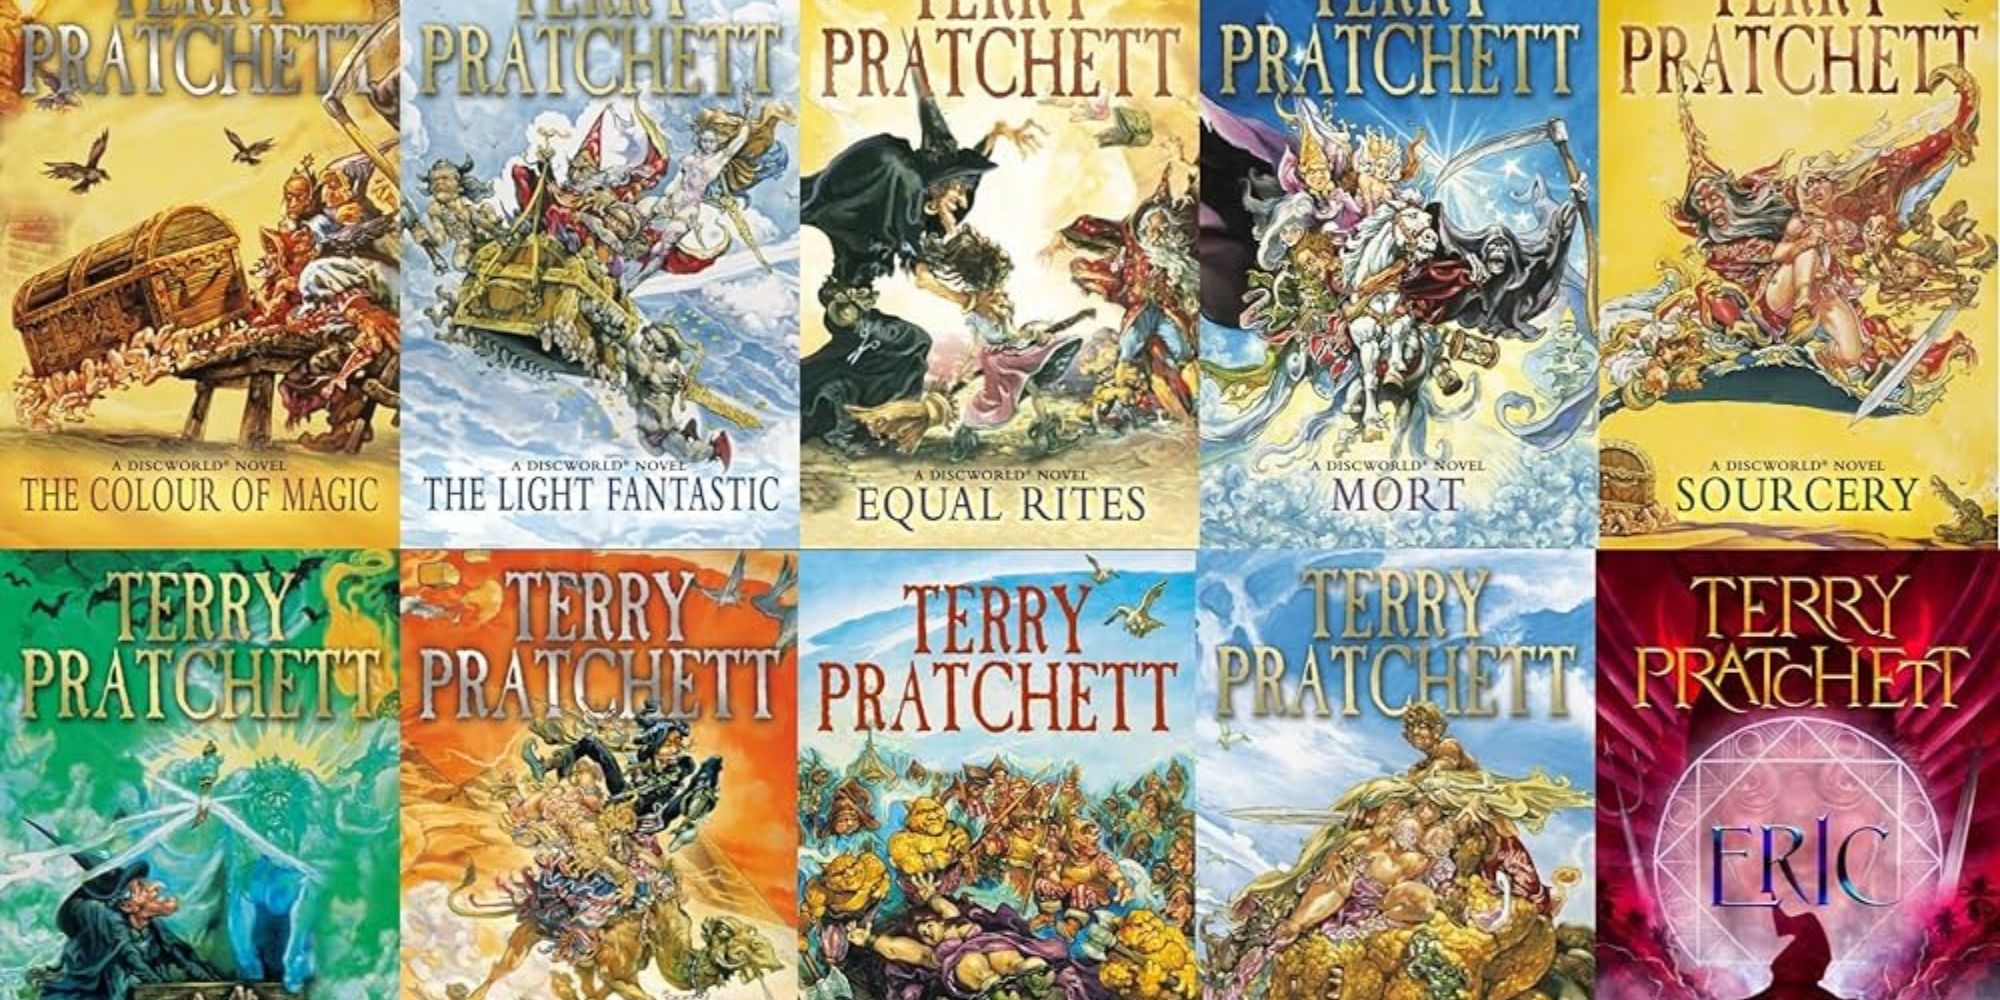 Collage of Discworld book covers